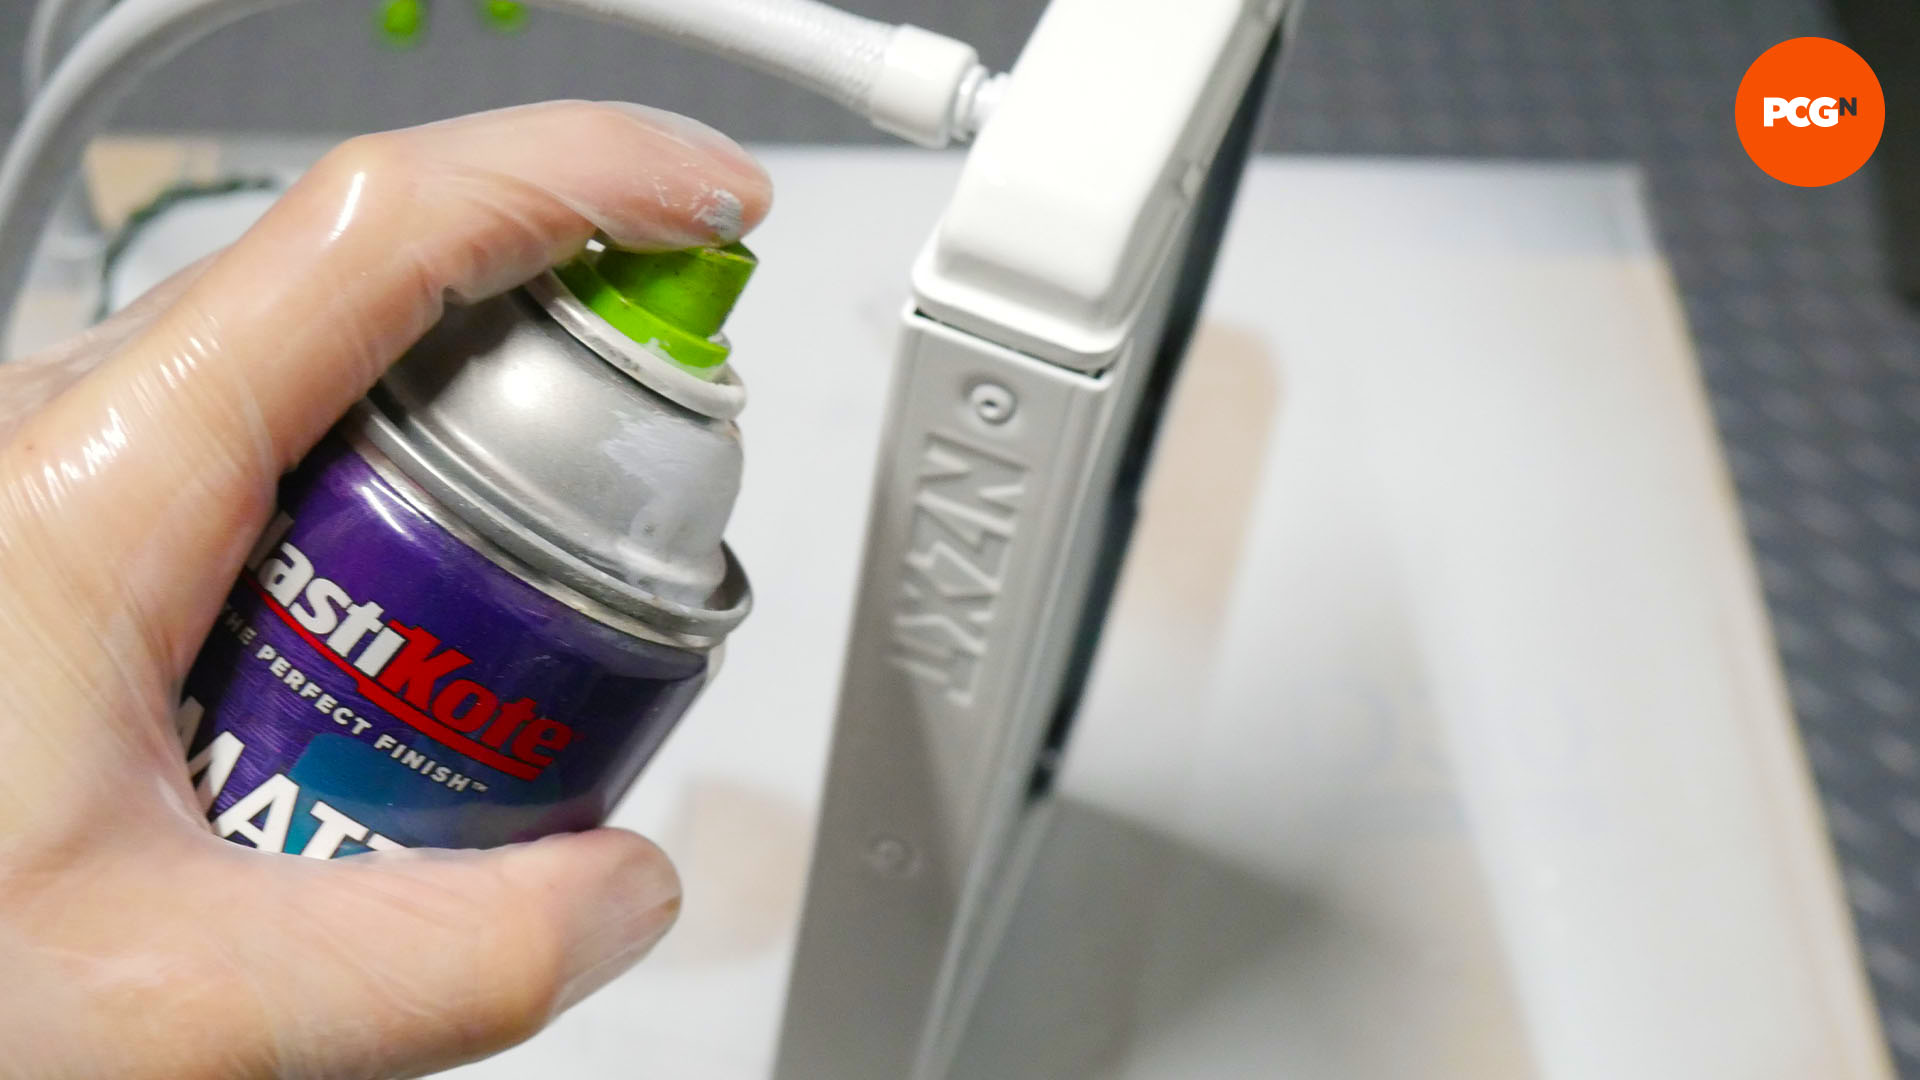 How to paint AIO cooler: Spray color coat